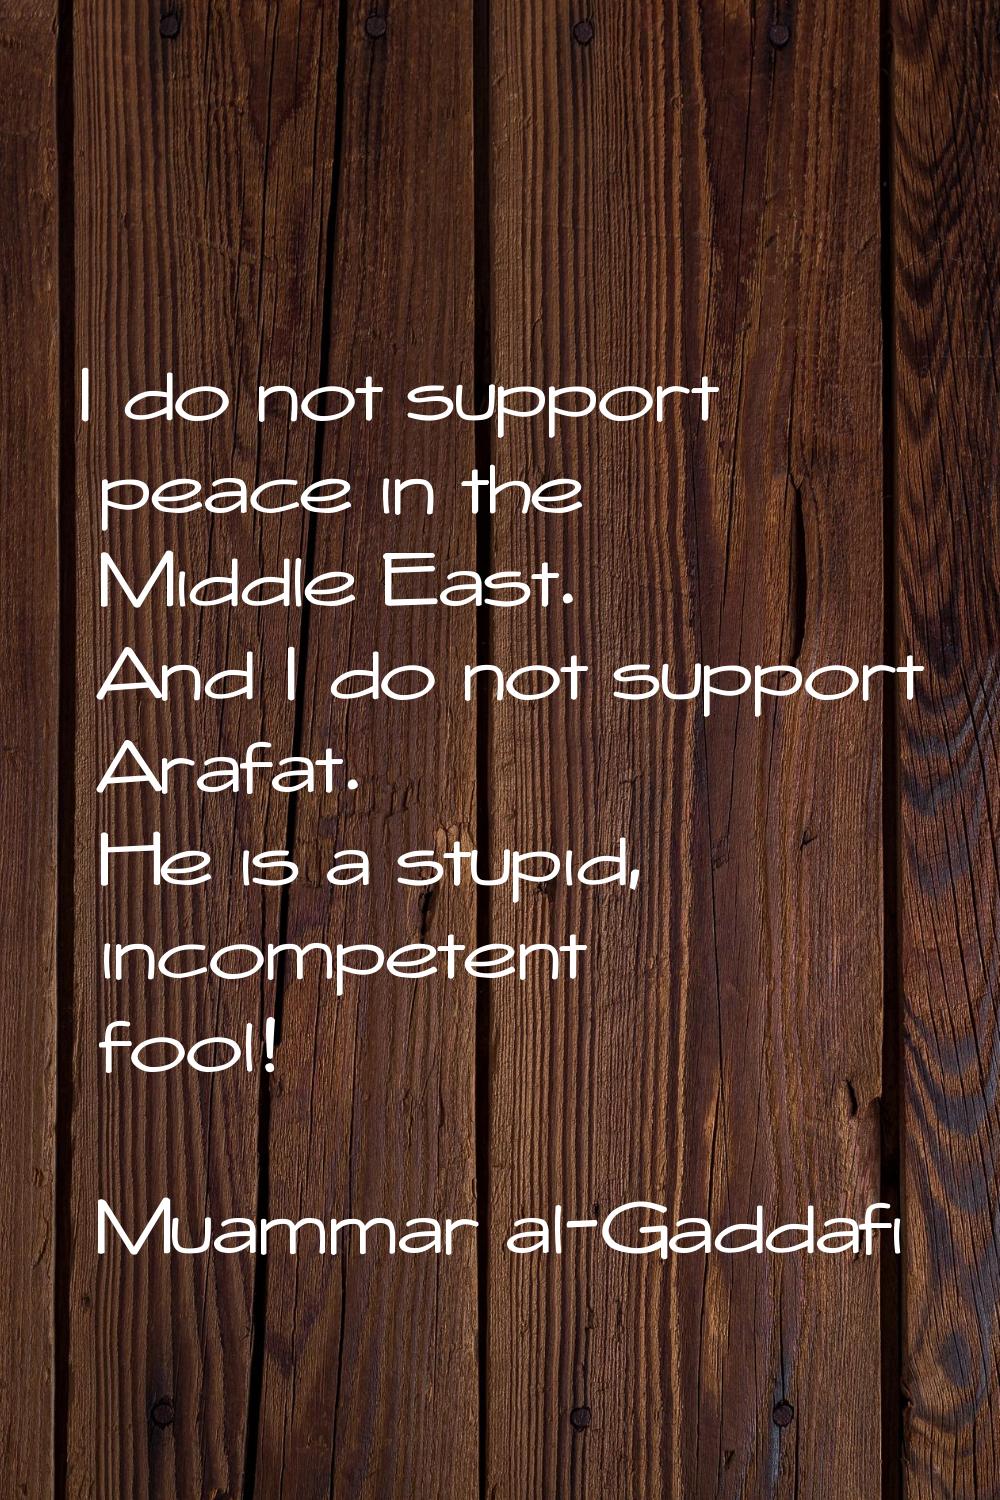 I do not support peace in the Middle East. And I do not support Arafat. He is a stupid, incompetent